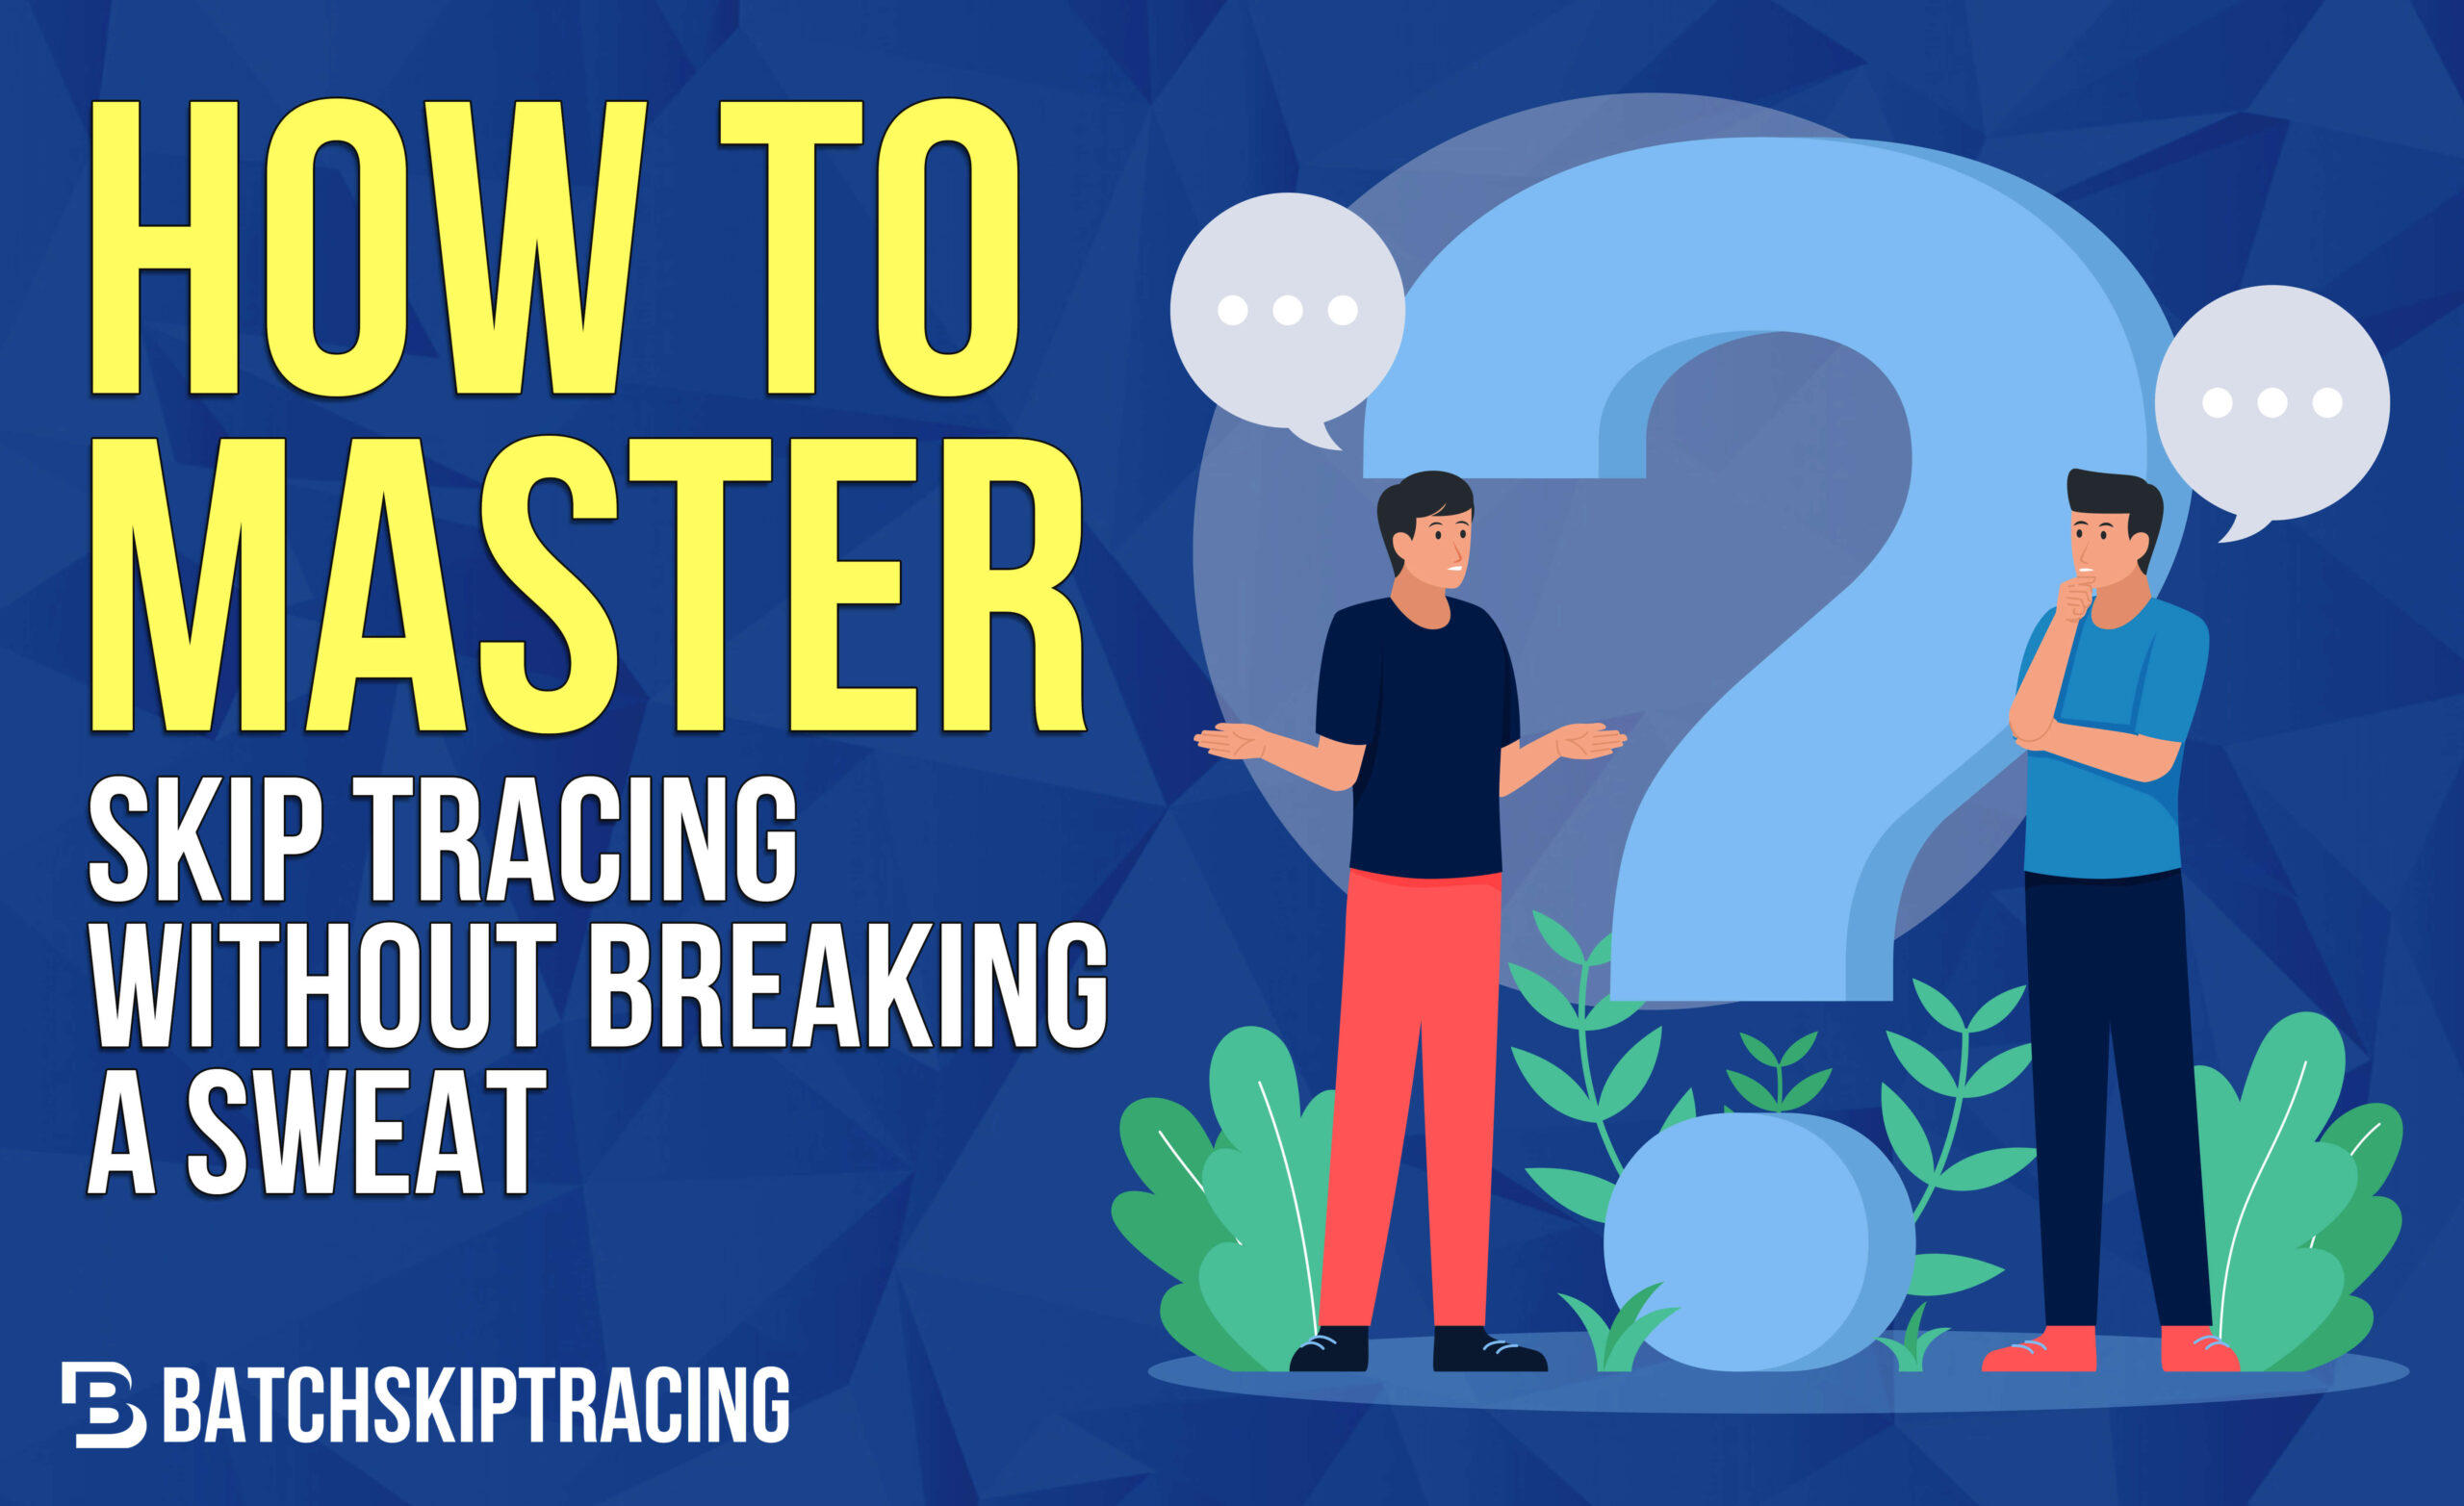 How to Master Skip Tracing Without Breaking A Sweat